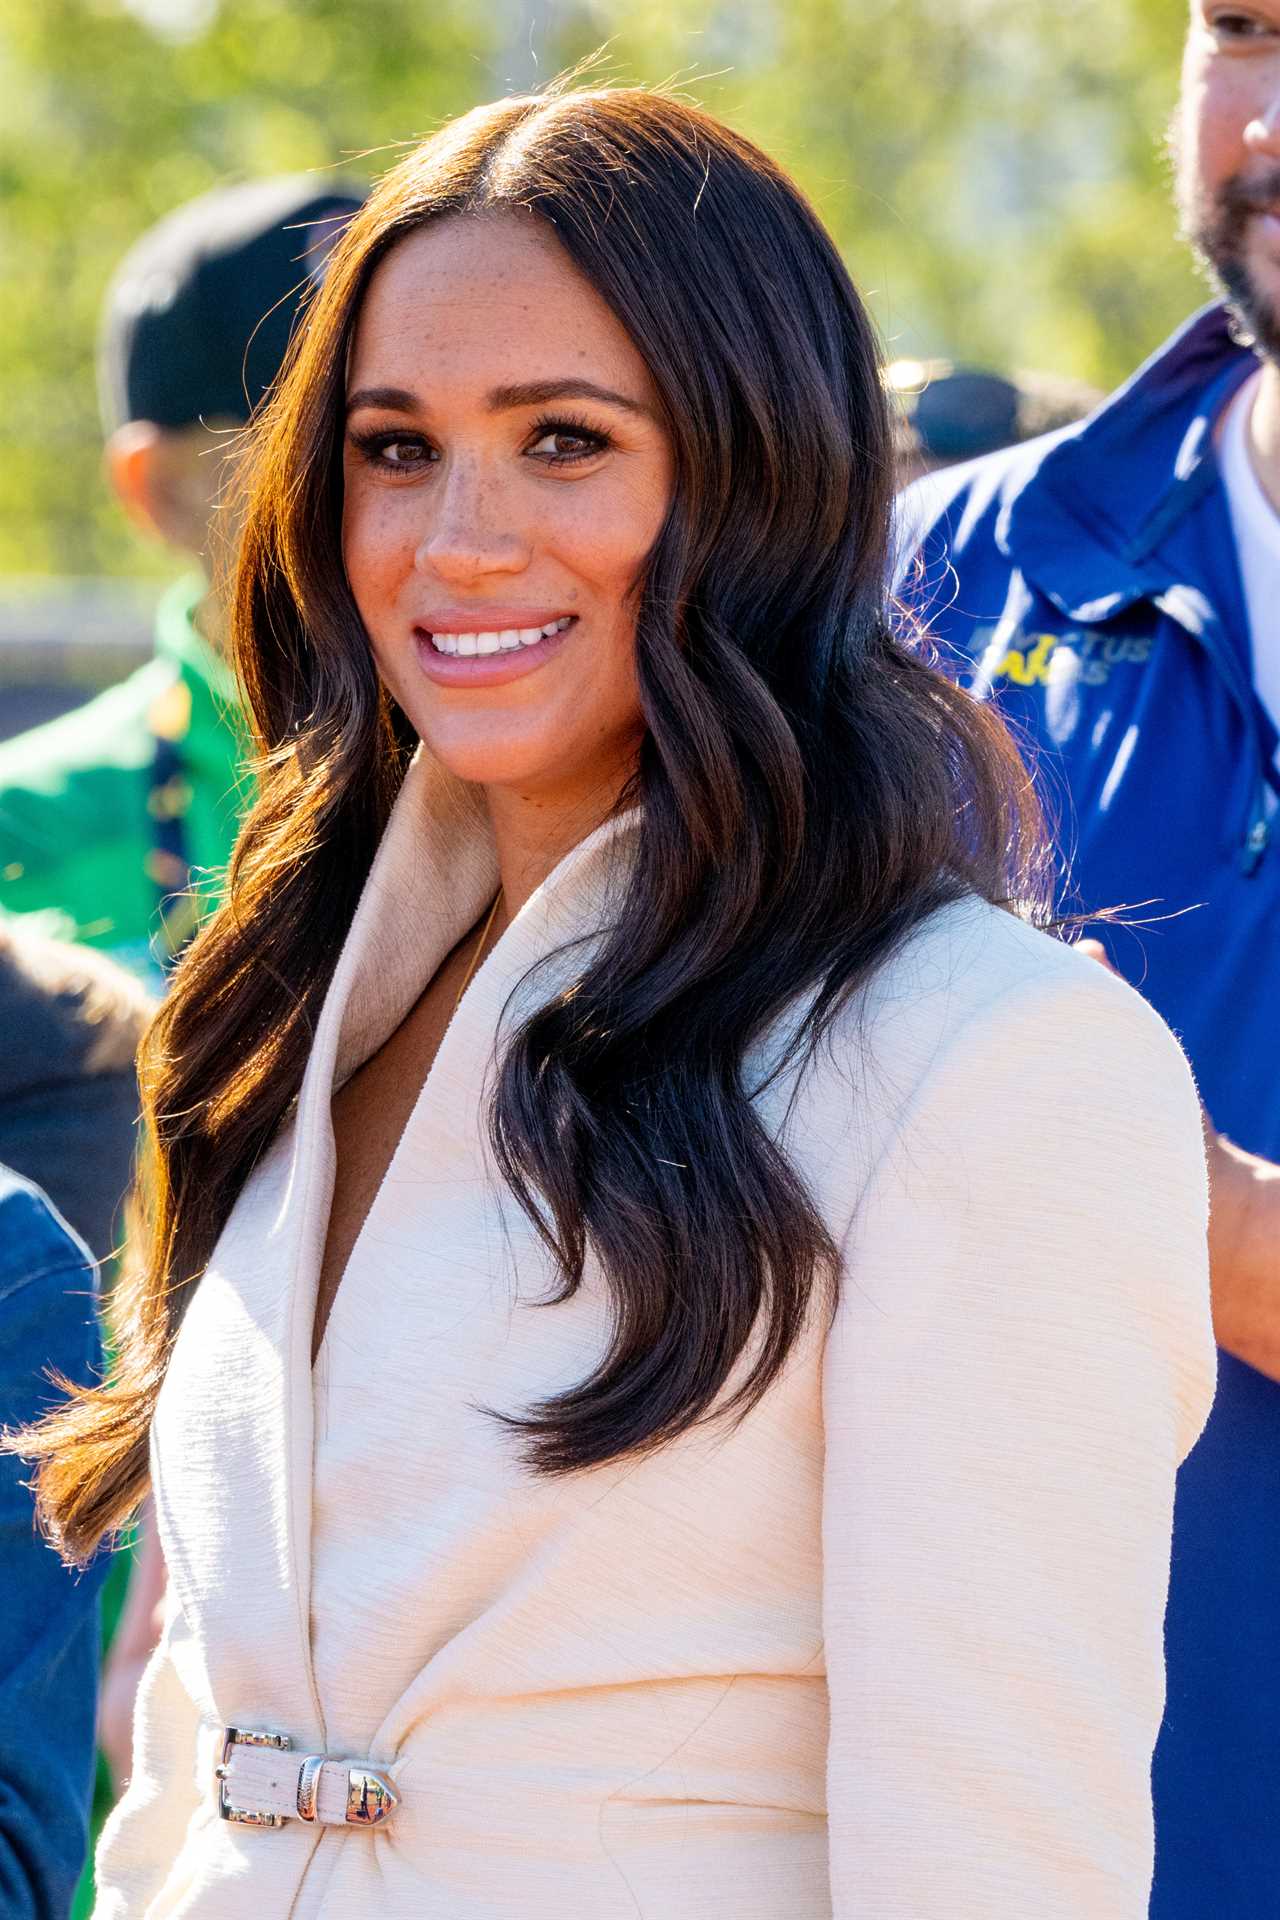 I’m a royal astrologer – Meghan Markle’s horoscope shows she sees herself as a Queen & another broadside is on way